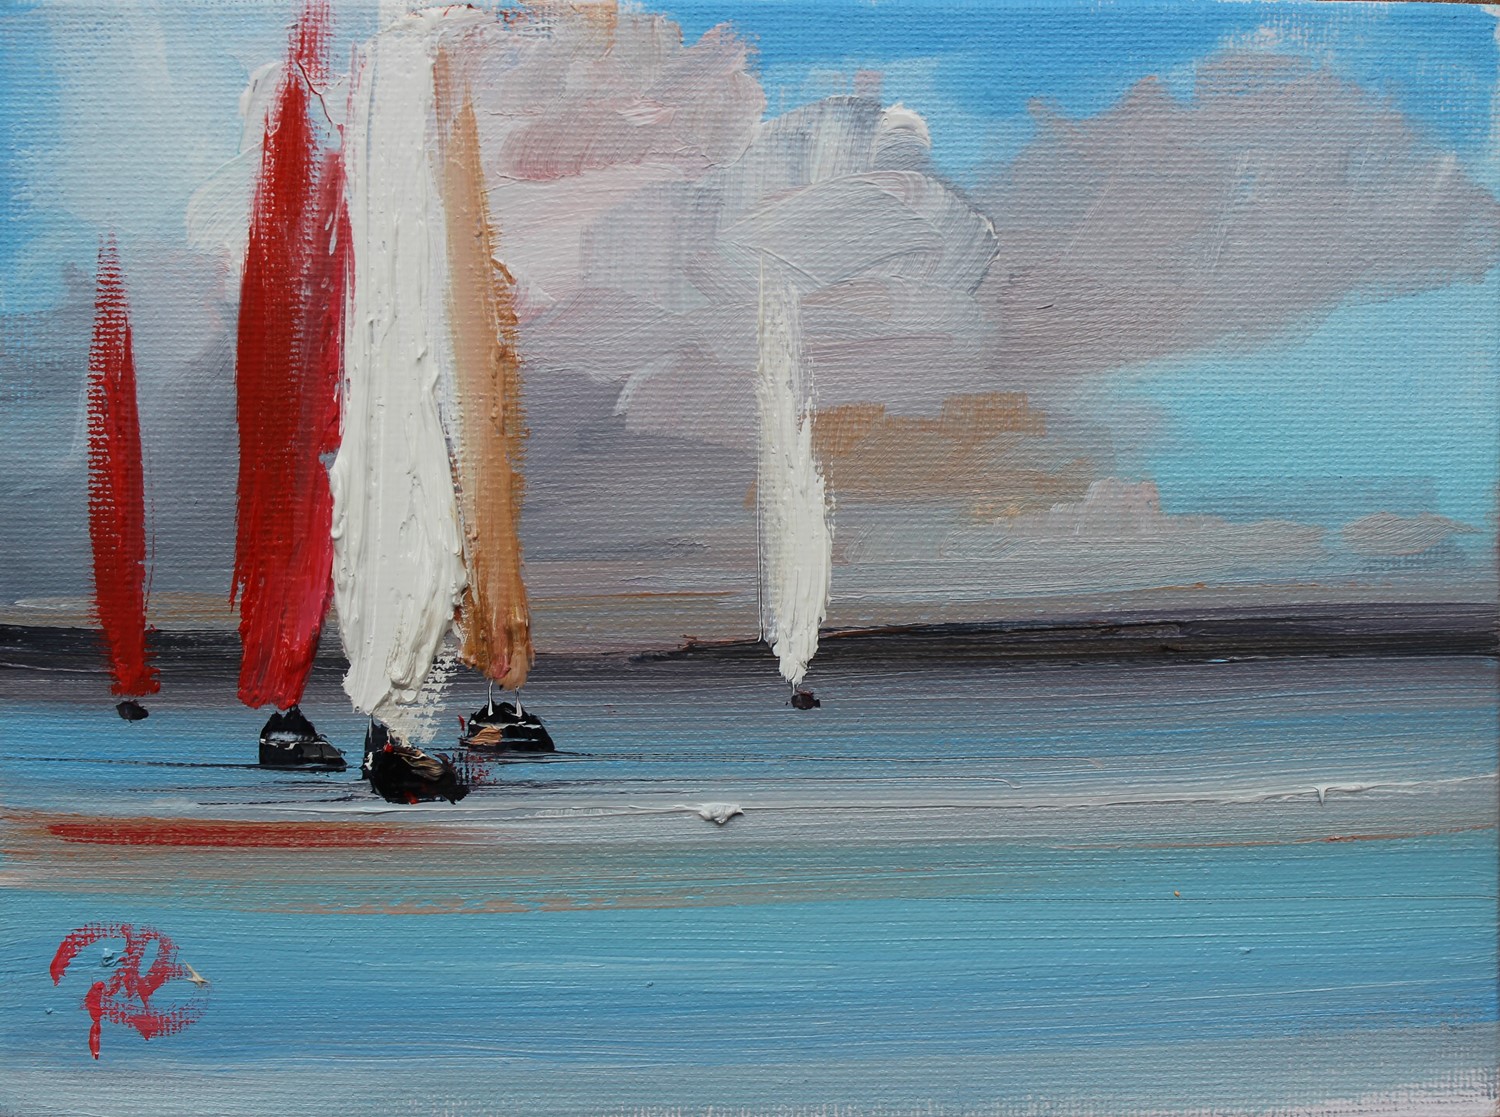 'Billowing Sails at Sea ' by artist Rosanne Barr